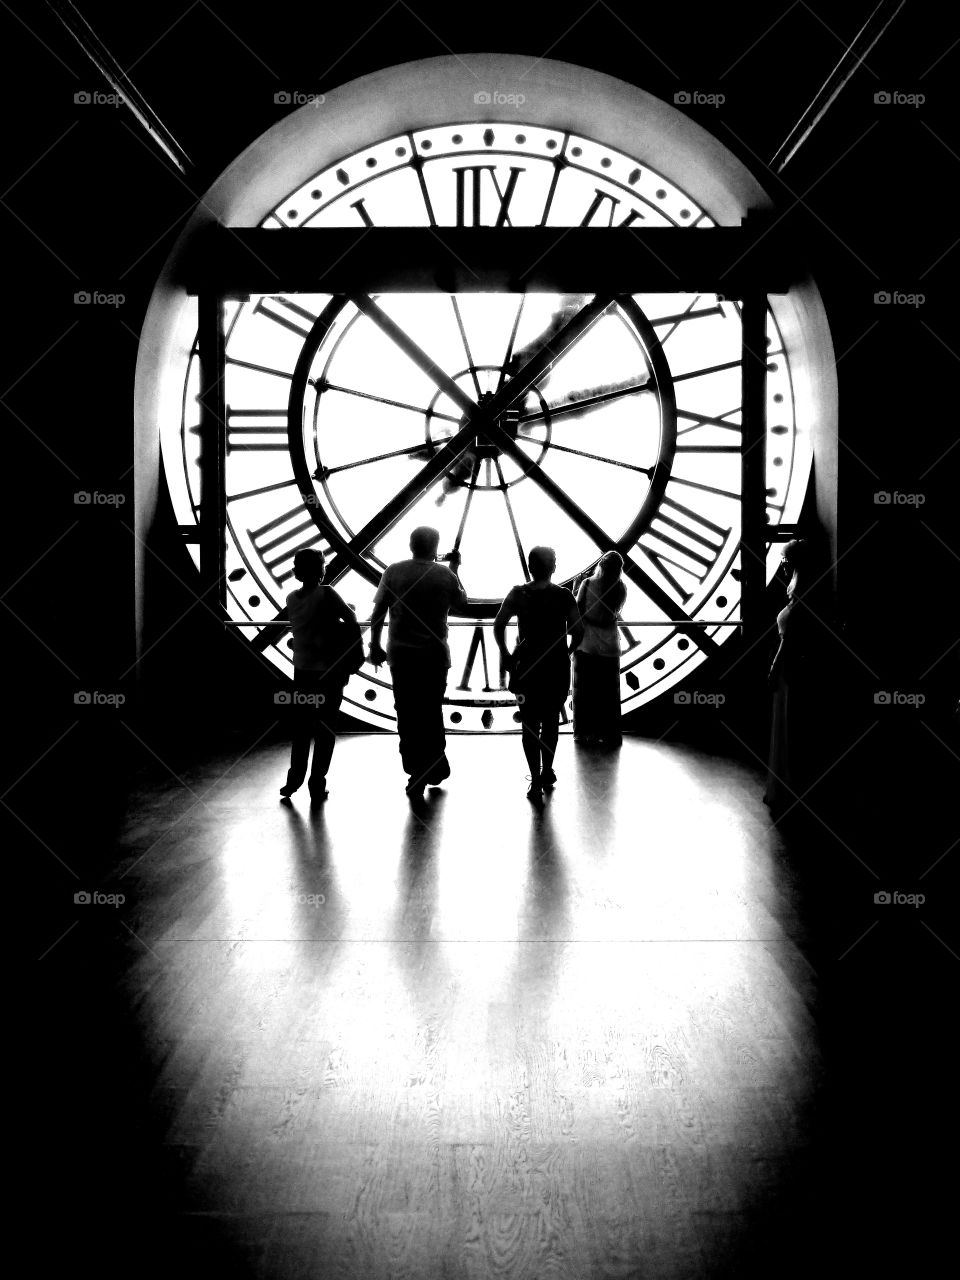 Silhouettes Inside Musee d’Orsay  in Front of the Large Clock